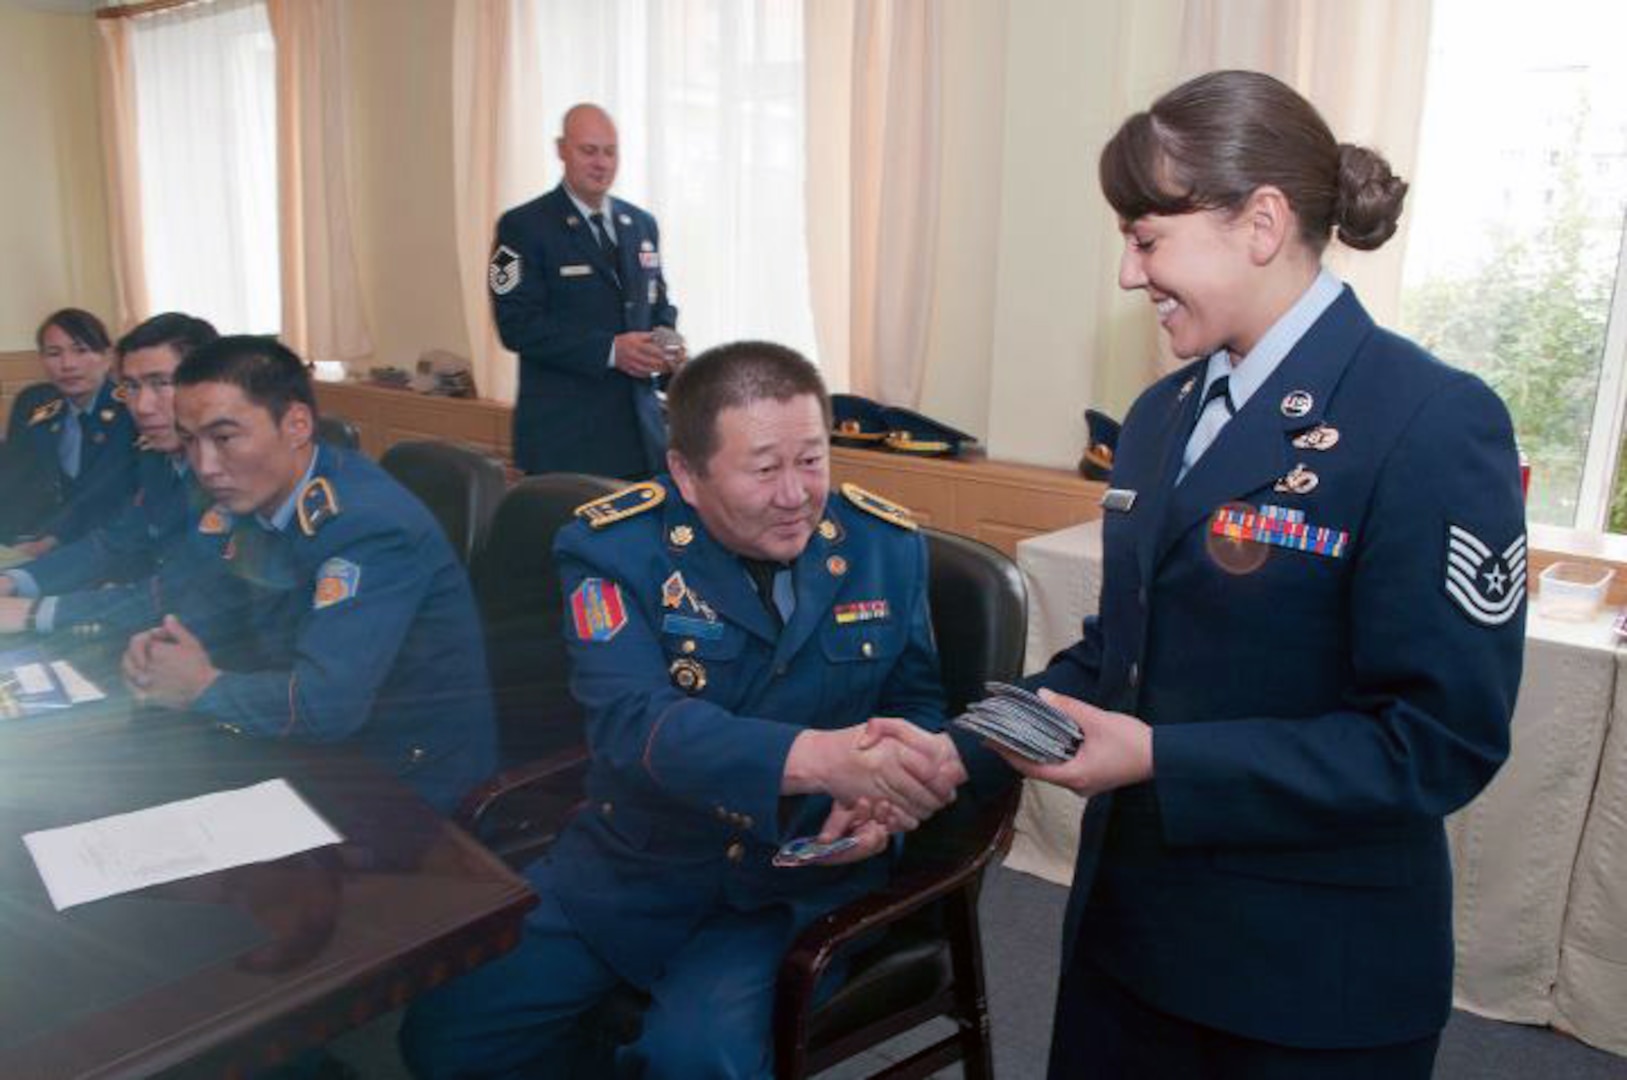 Air Force Tech. Sgt. Nina Kolyvanova, survey team chief for the Alaska National Guard's Joint Forces Headquarters, hands out tokens of appreciation to members of the National Emergency Management Agency during the Alaska National Guard HAZMAT exchange. Kolyvanova and three other Alaska National Guard members traveled to Mongolia to participate in the exchange.